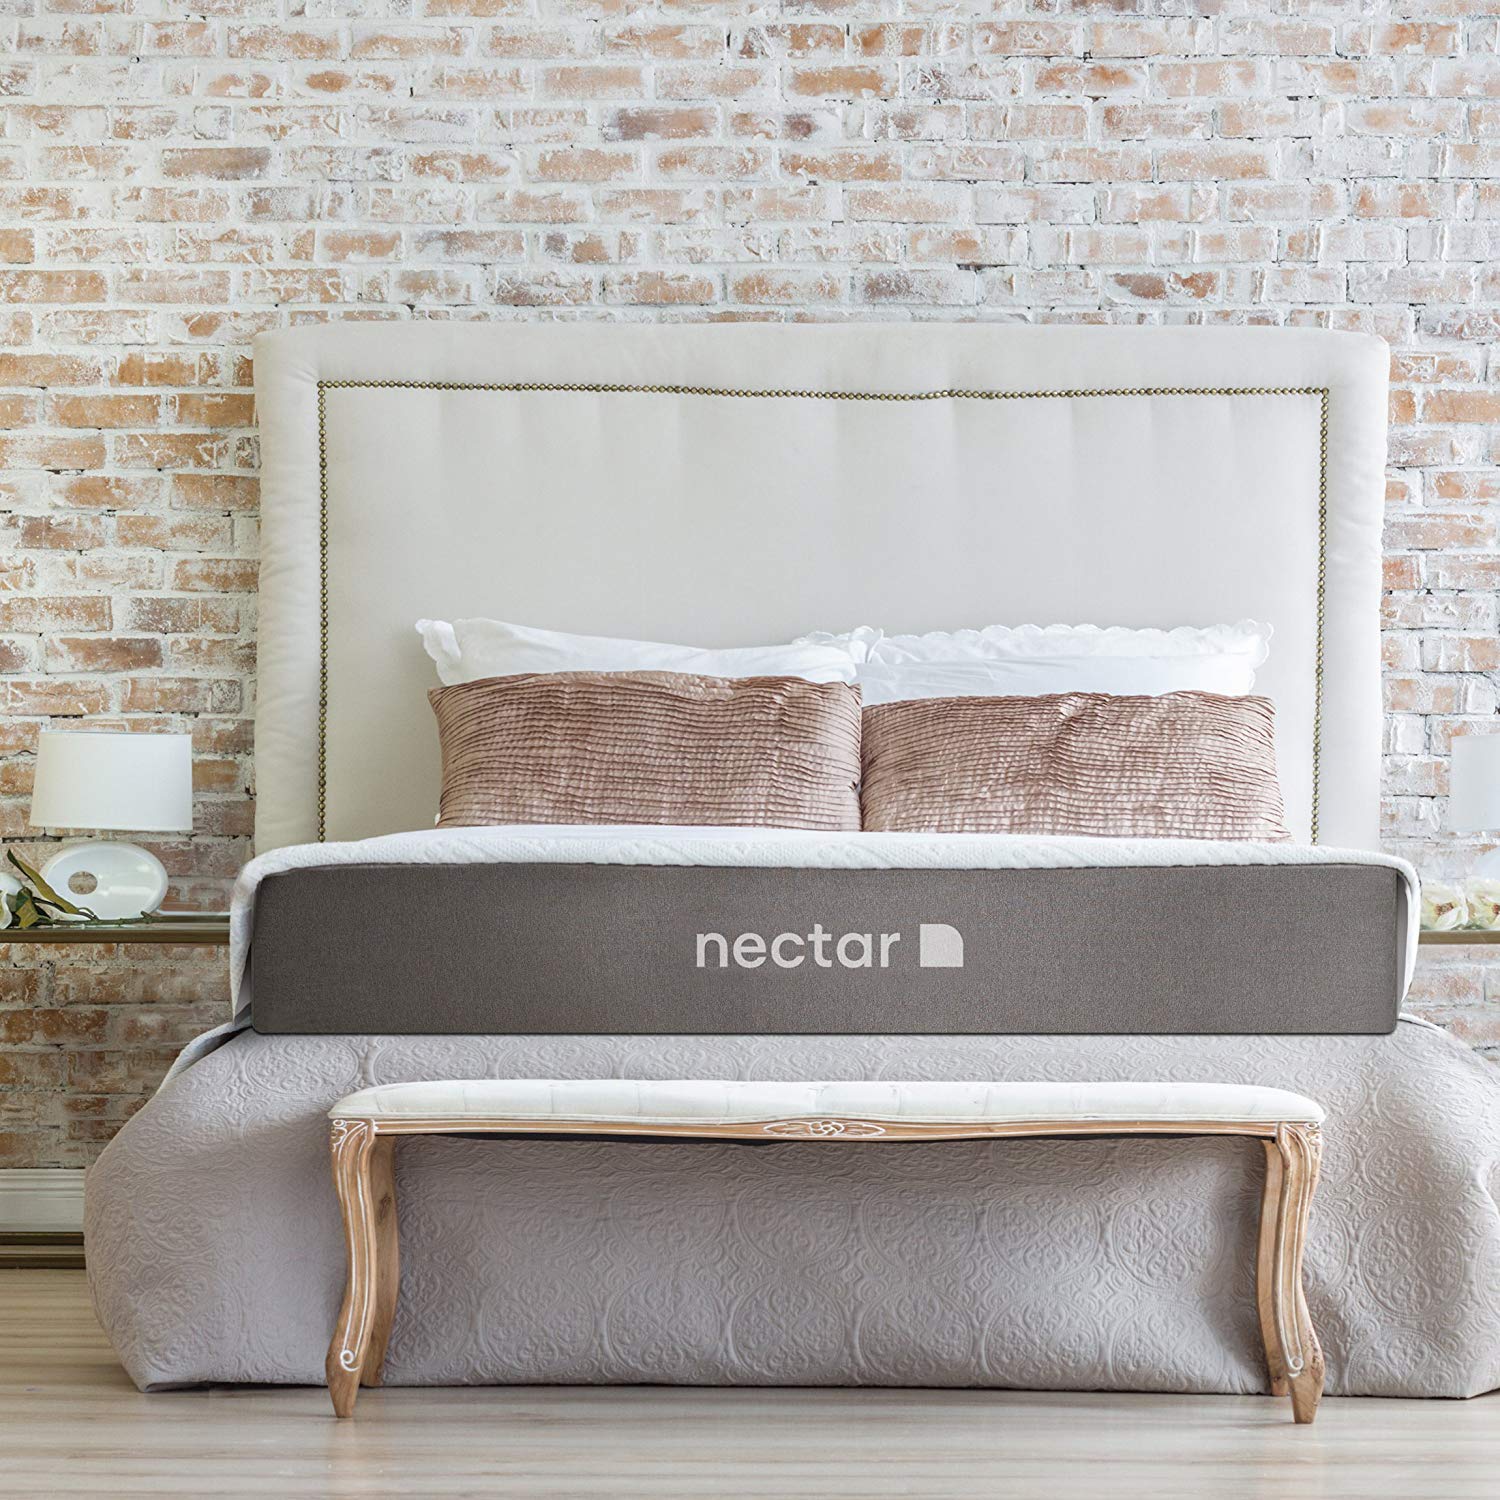 An image of Nectar Gel Memory Foam King-Size 11-Inch Thick Mattress | Know Your Mattress 